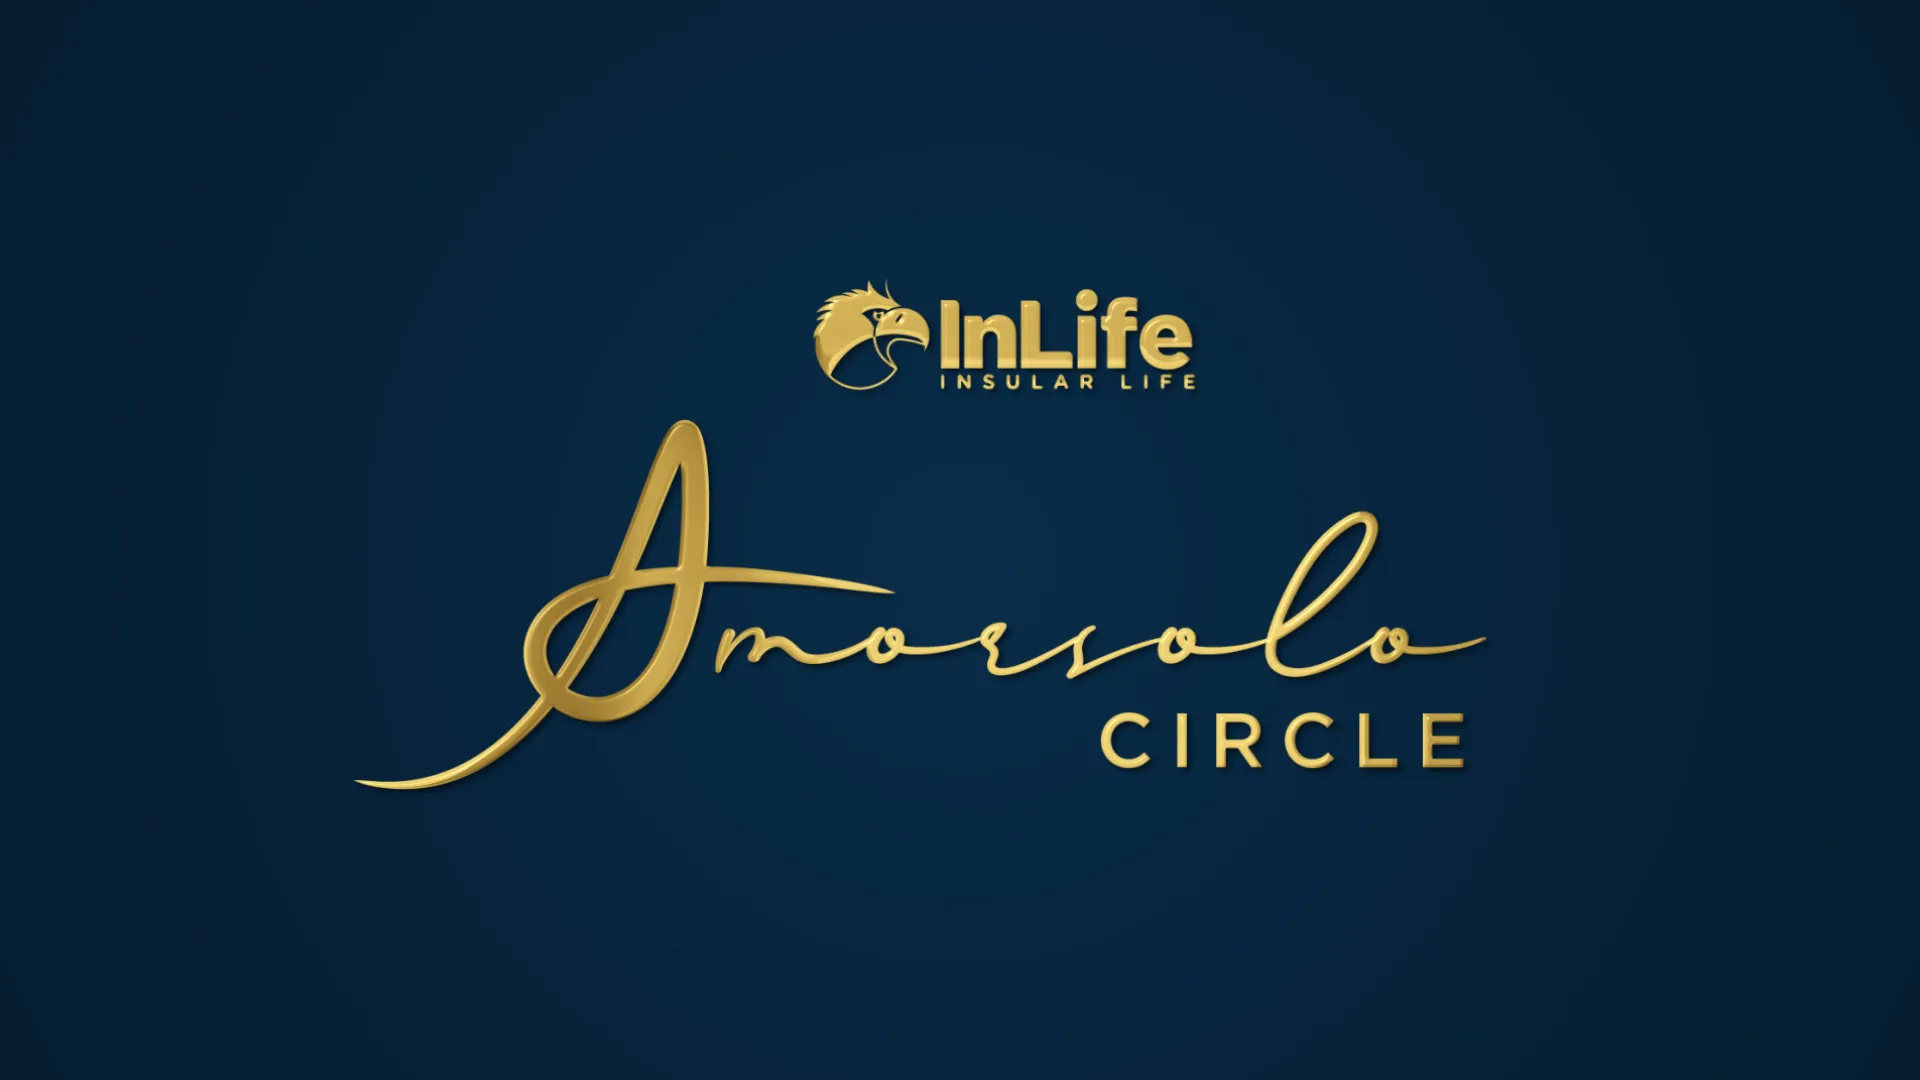 inlife-launches-new-program-exclusive-to-elite-policyholders-holds-economic-briefing